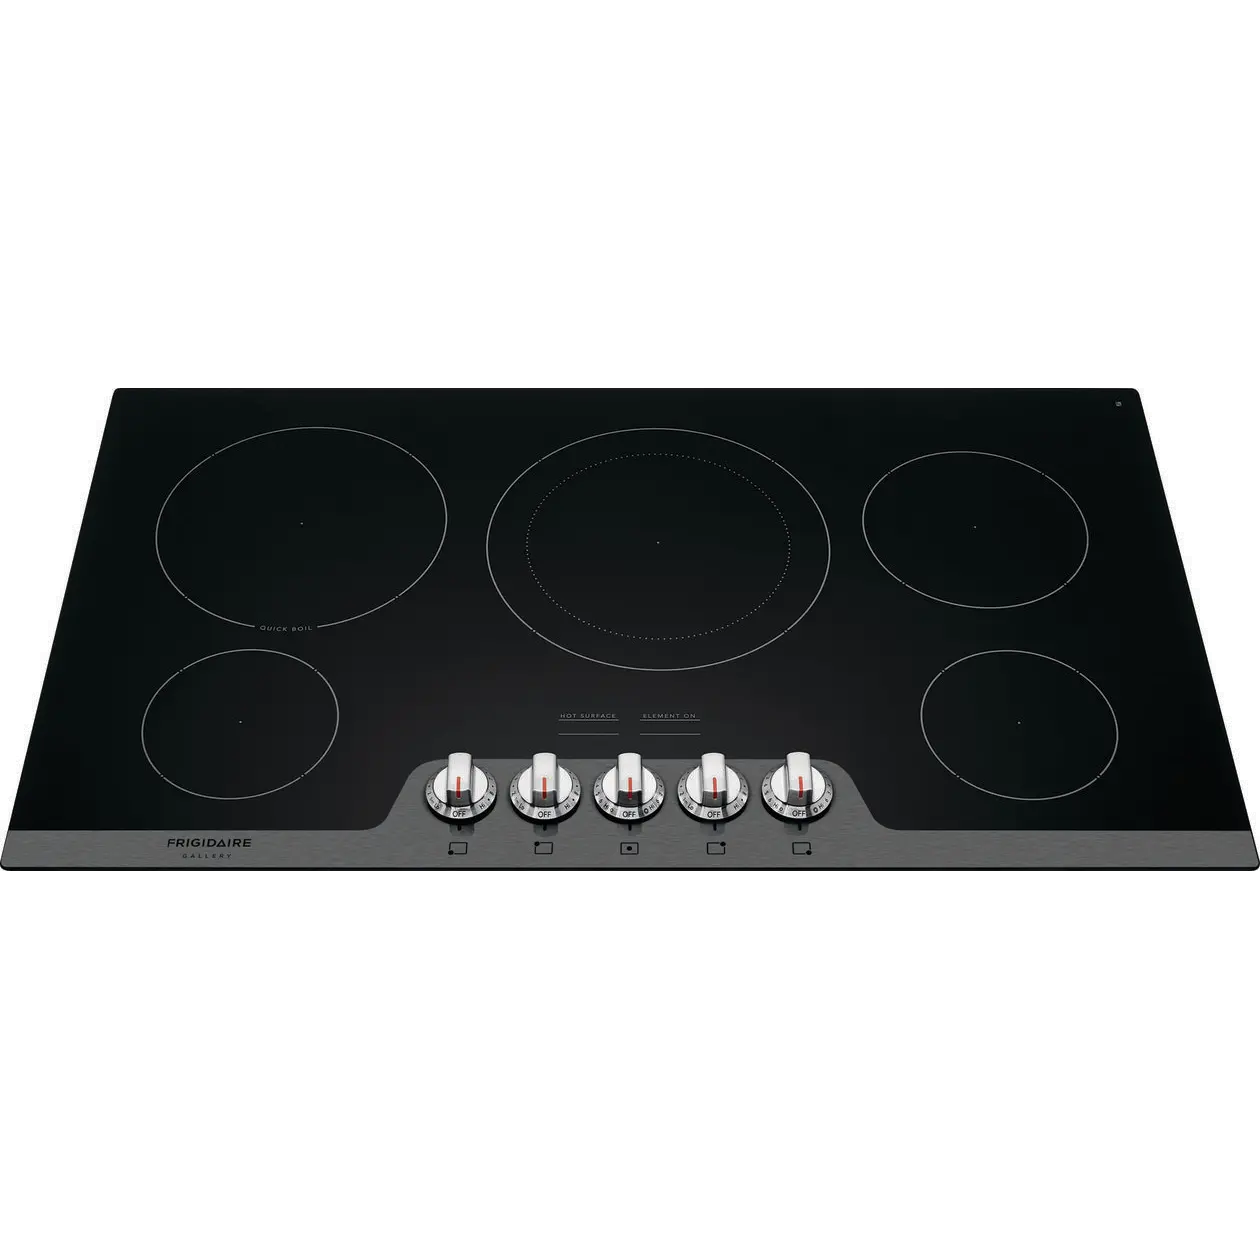 FGEC3068US Frigidaire Gallery Electric Cooktop - 30 Inch Stainless Steel-1